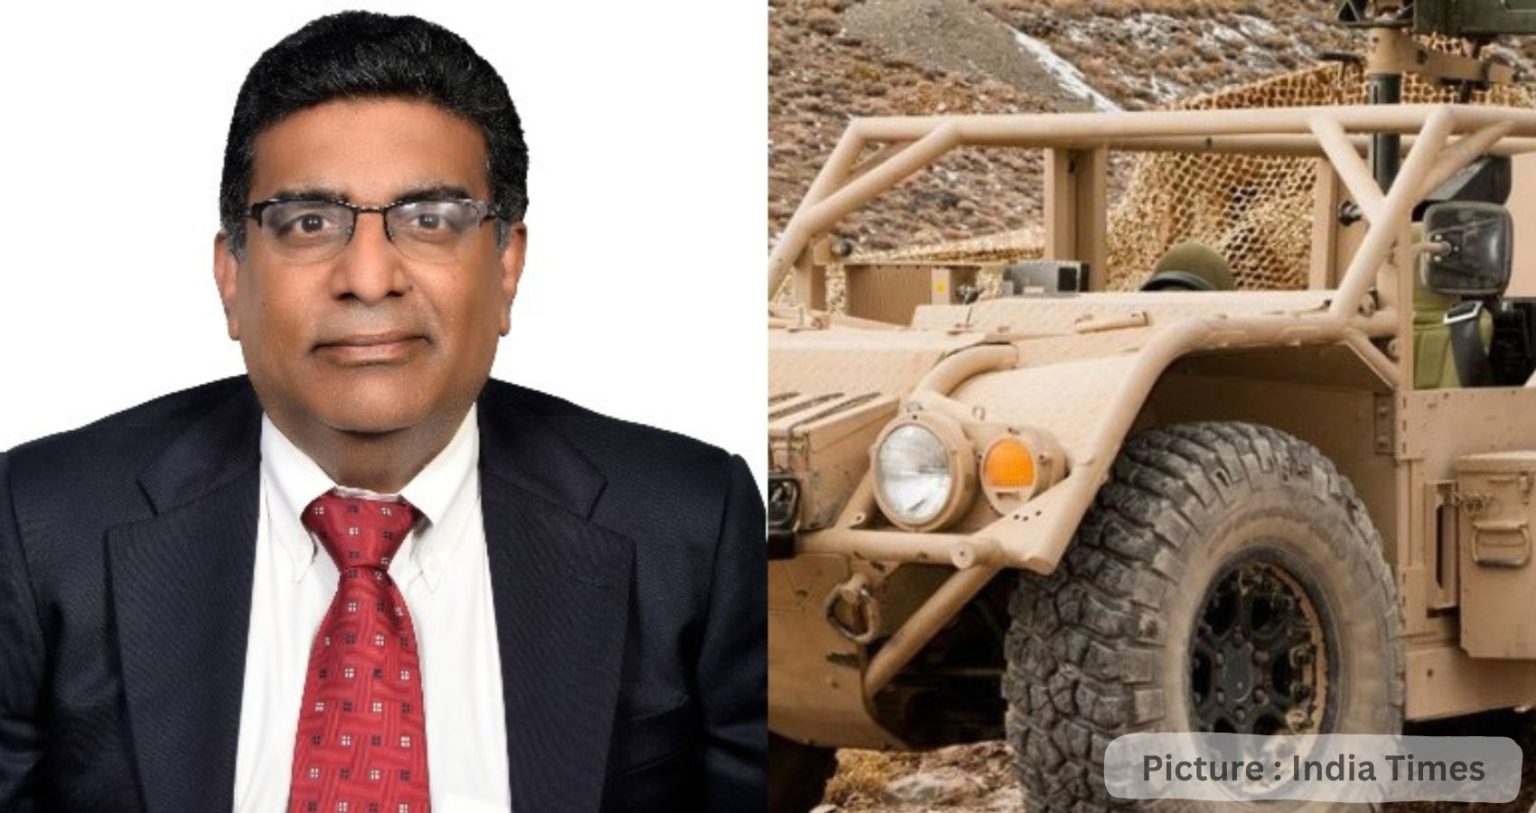 Abraham Pannikottu-Led Firm To Develop Specialized Zero-Pressure Tires For The US Army